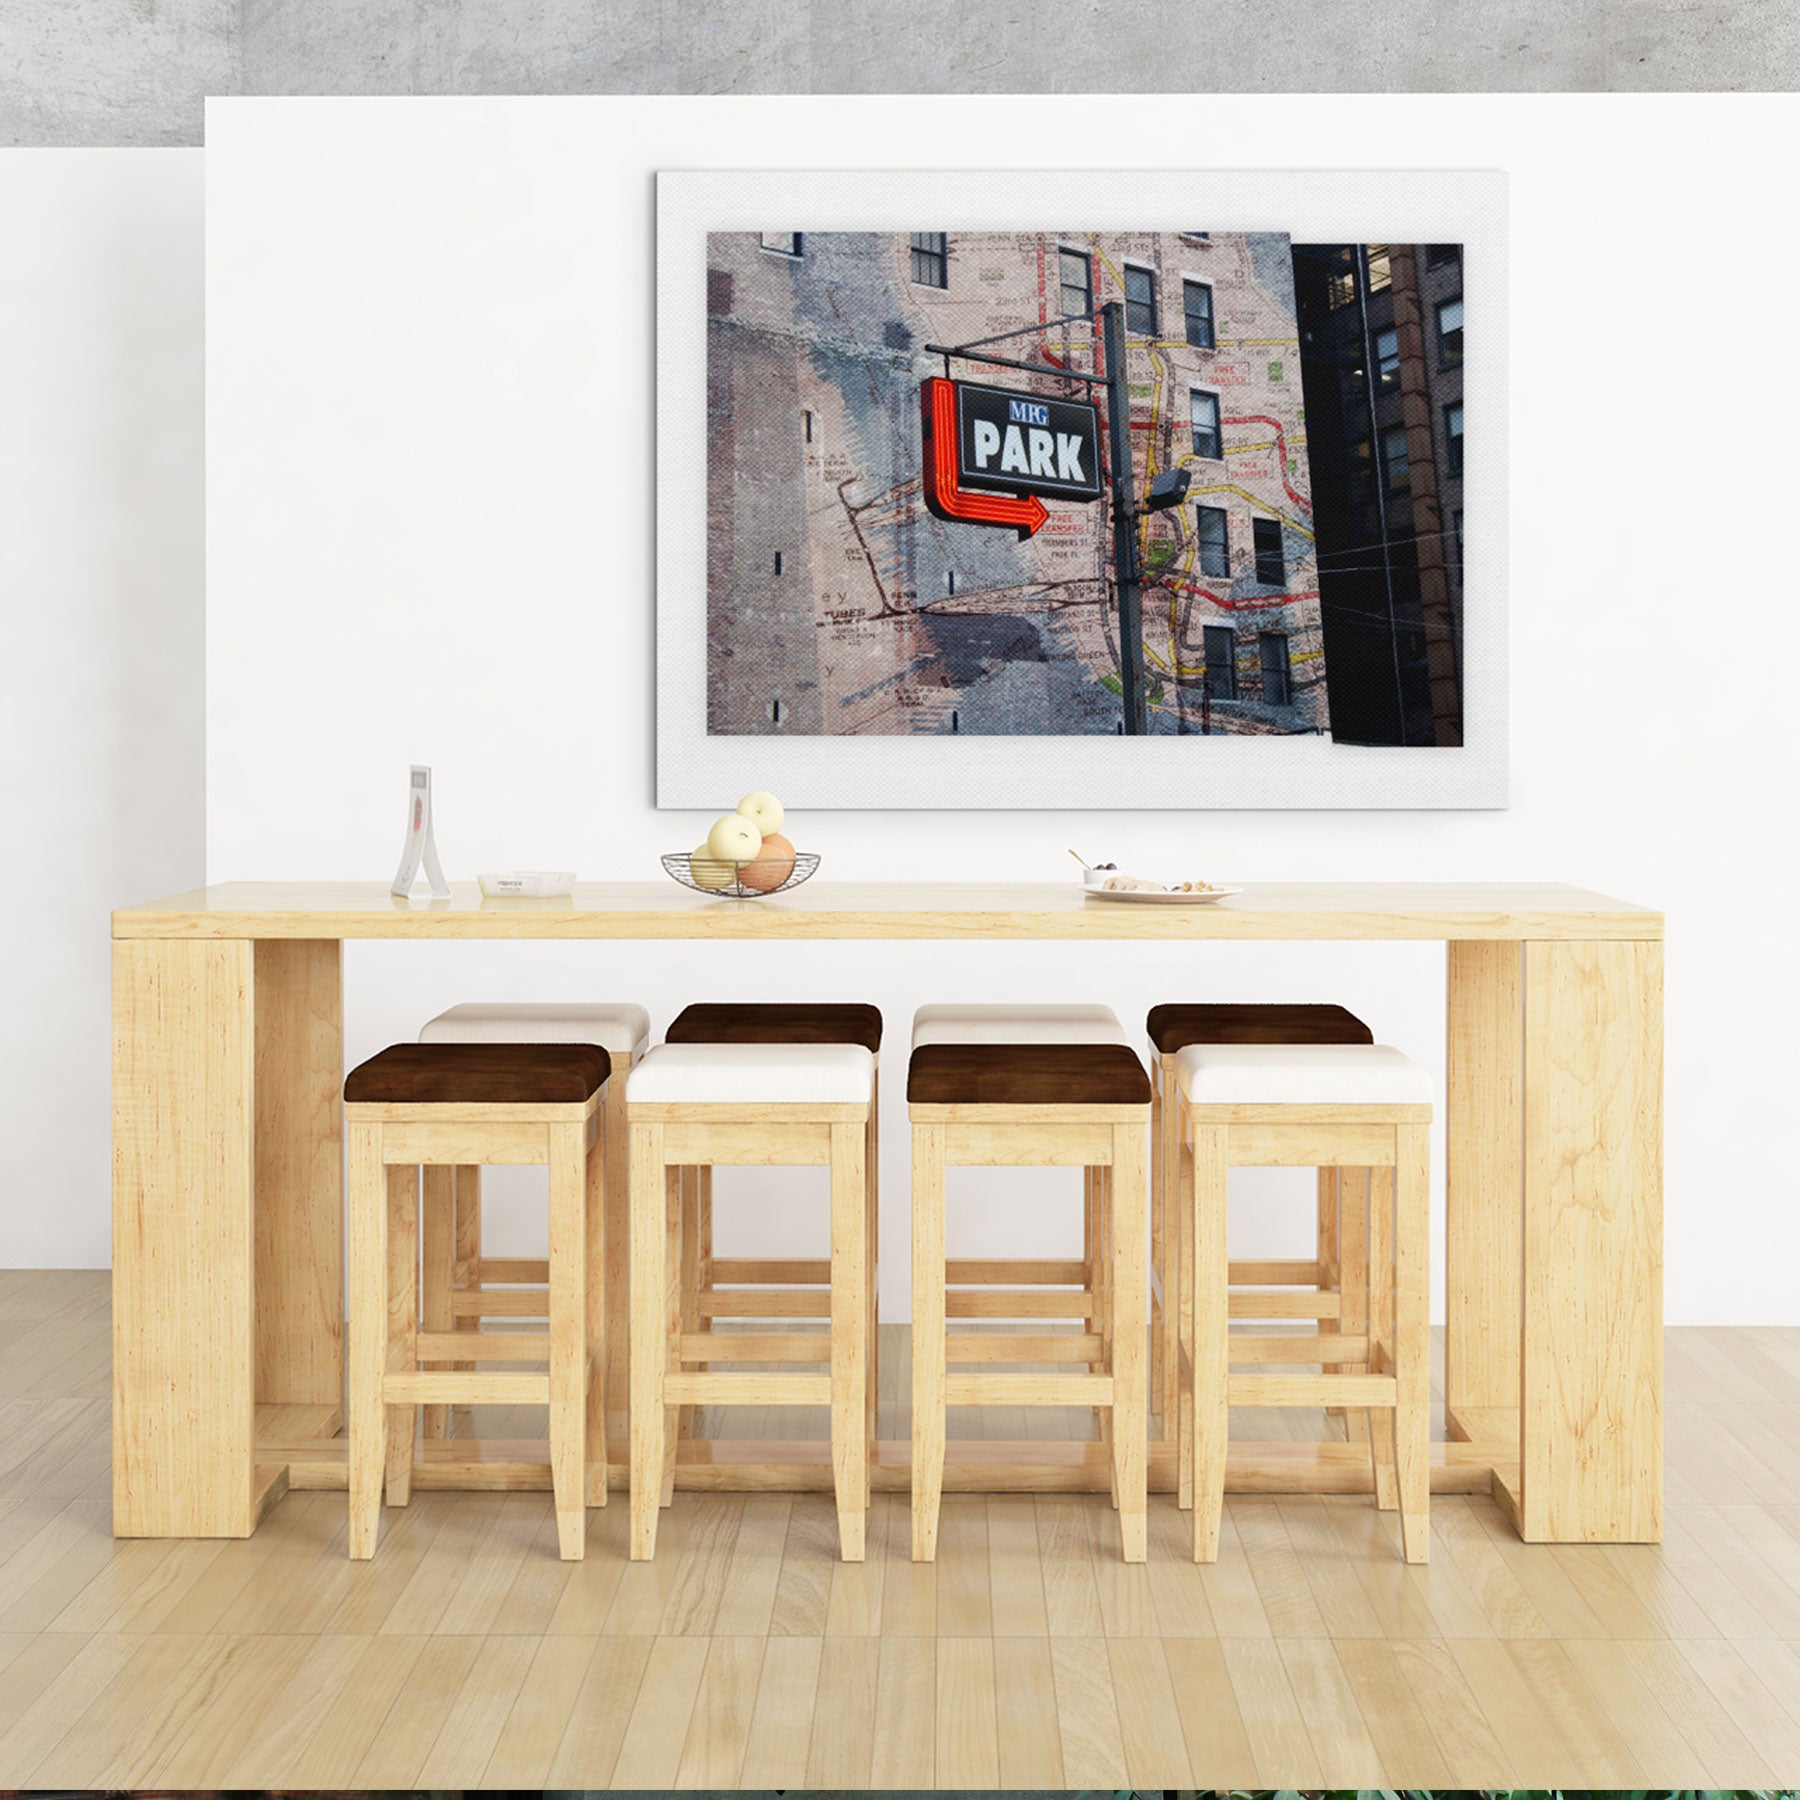 Wall art poster showing Midtown Manhattan in New York City, Manhattan., in a office space.